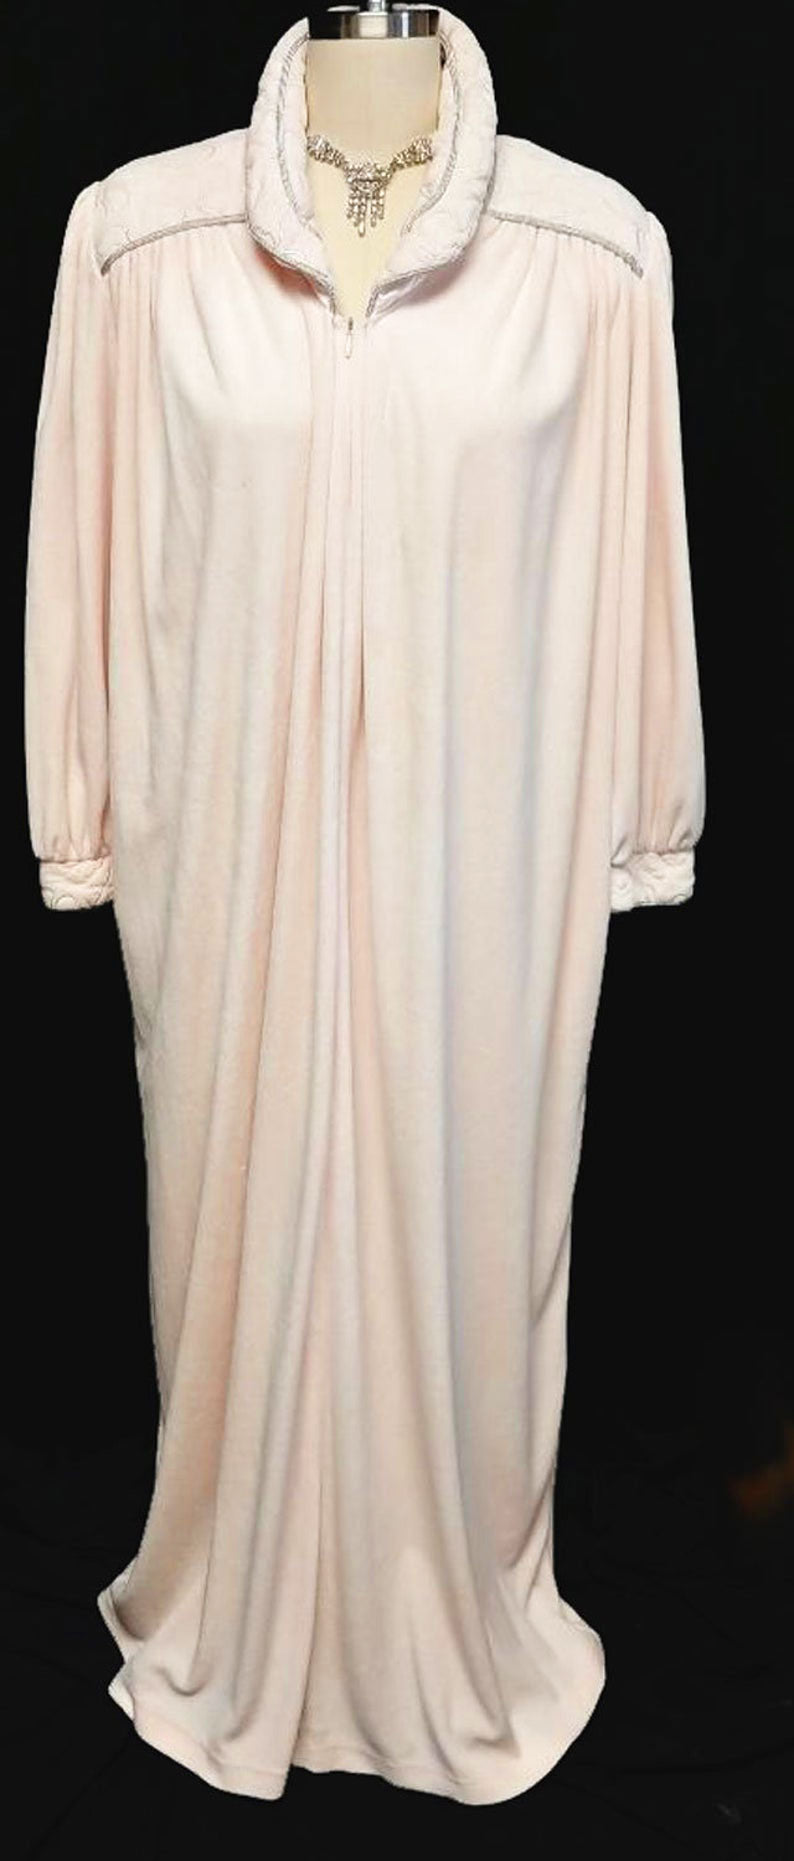 Kissimo Women's winter dressing gown: for sale at 16.99€ on Mecshopping.it